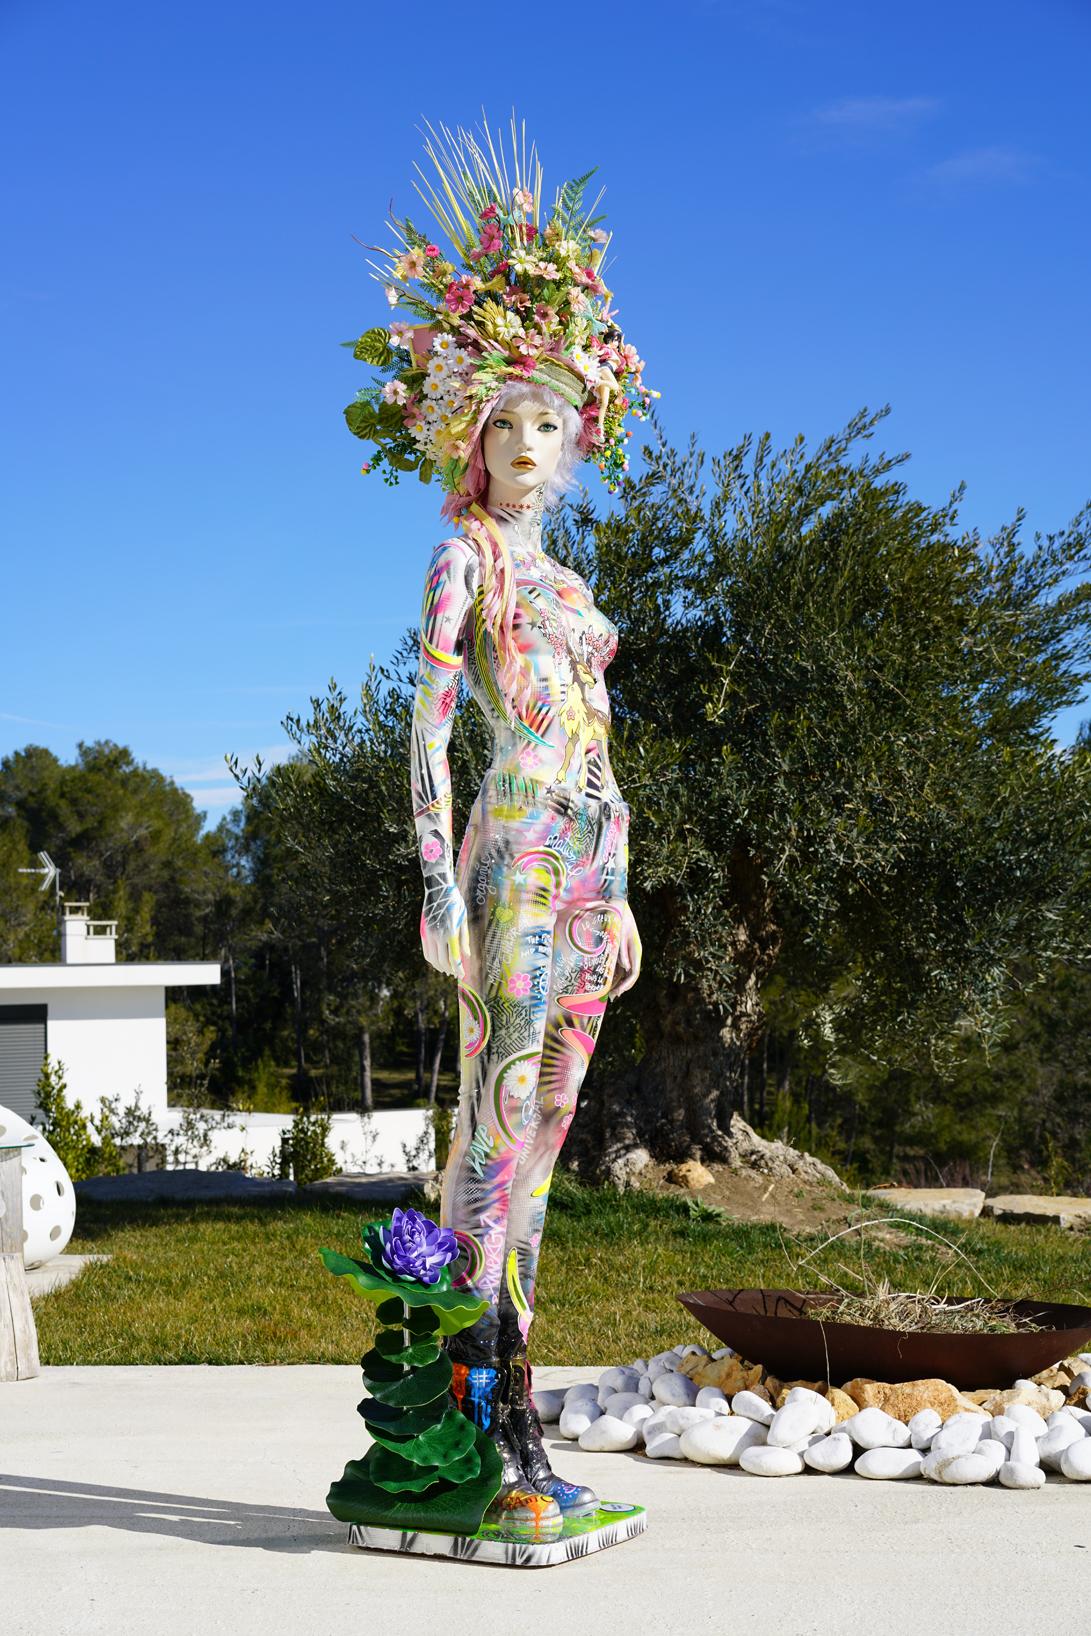 Spring - Sculpture by David Cintract